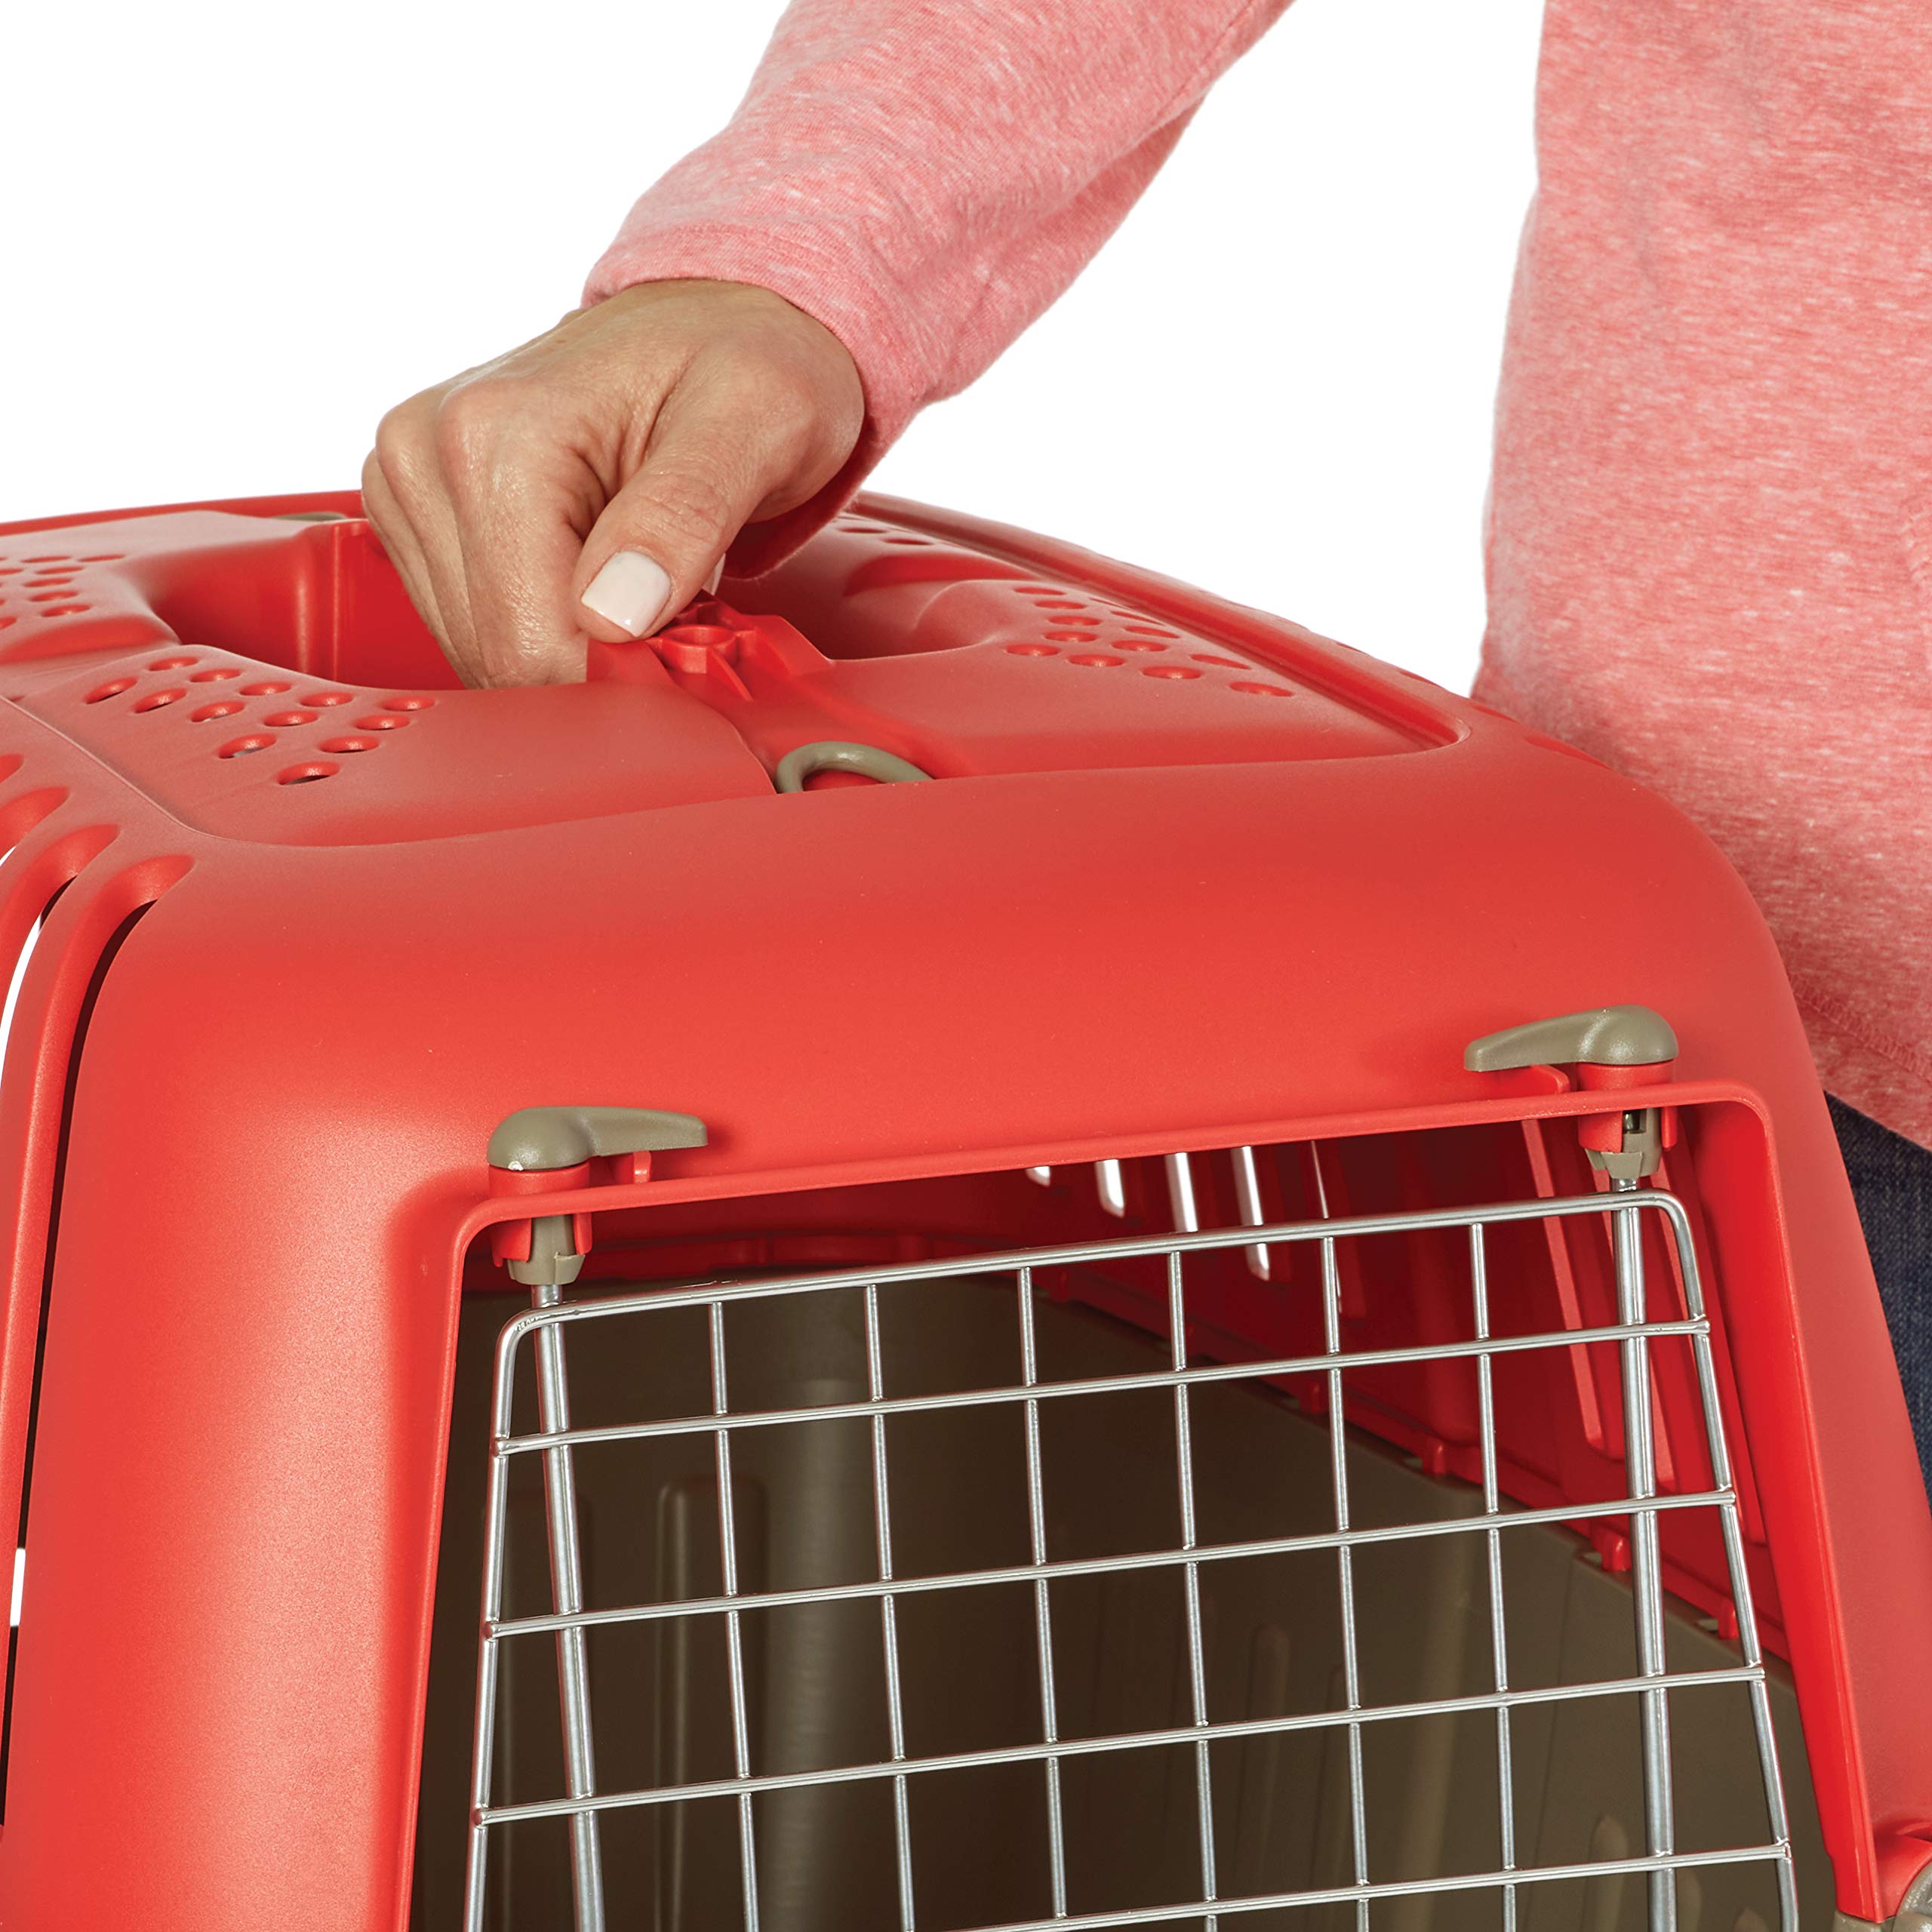 Midwest Spree Hard-Sided Travel Cat and Dog Kennel Carrier - Red - 24